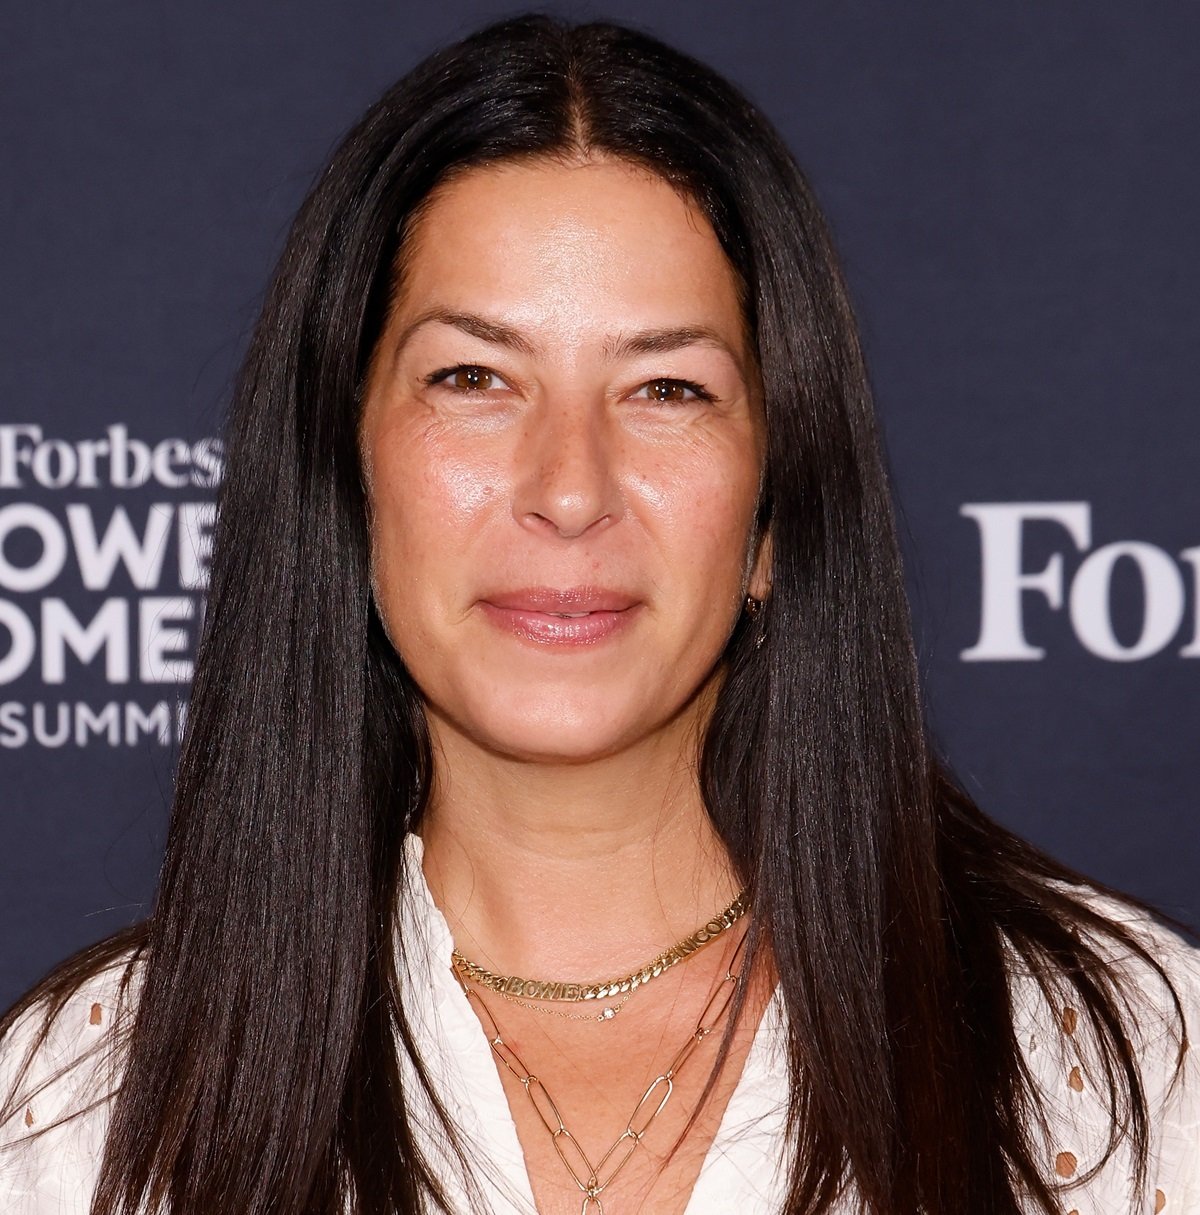 Rebecca Minkoff attends the 2023 Forbes Power Women's Summit at Jazz at Lincoln Center on September 14, 2023 in New York City.